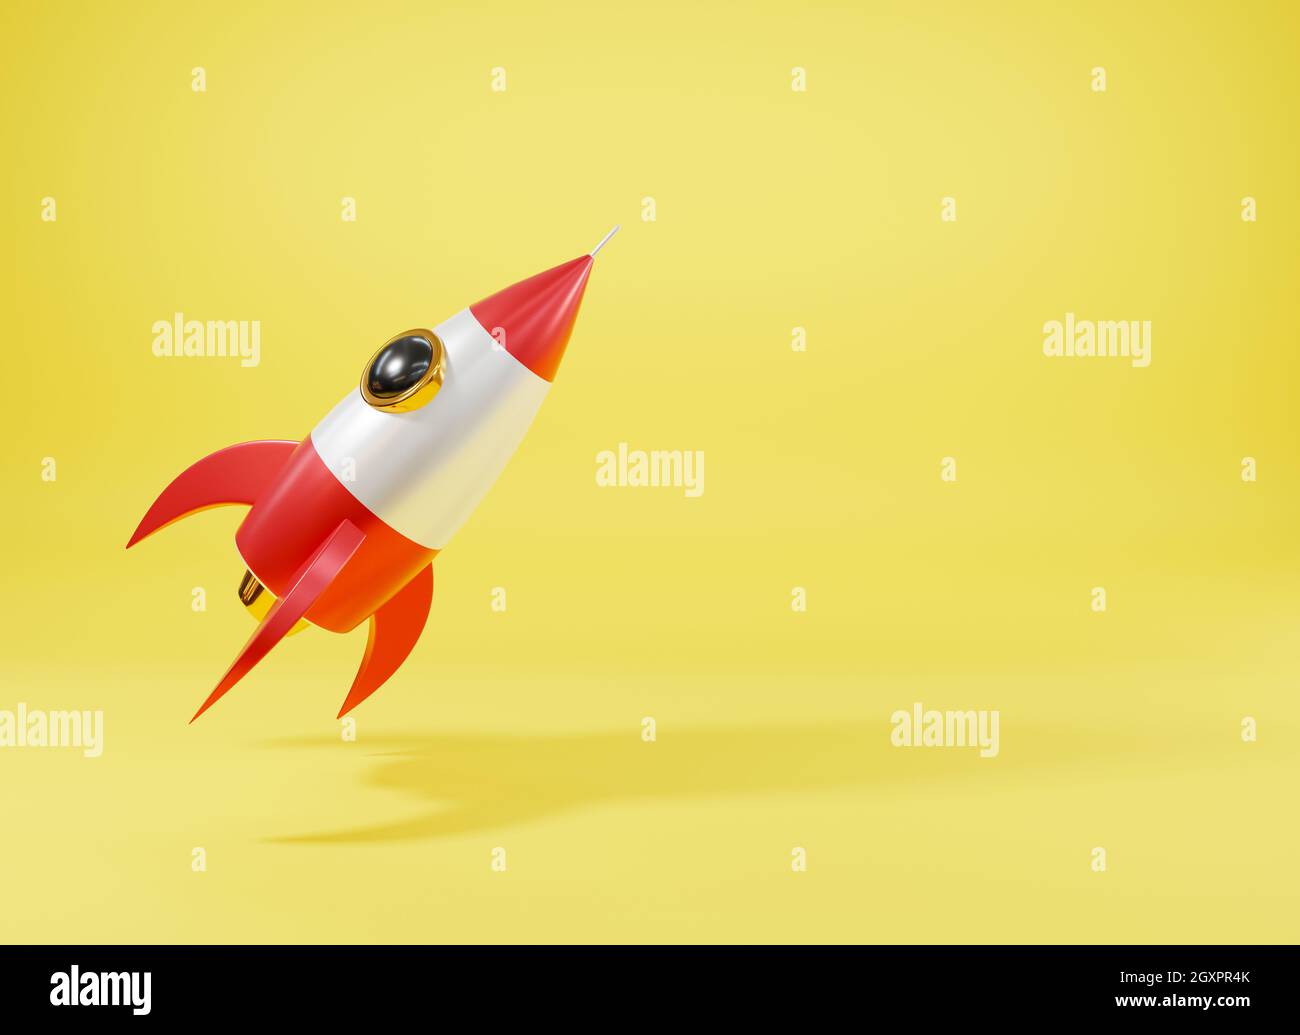 Rocket spaceship antique style, Model cartoon toy space exploration icon on yellow background, Retro fly to the moon and galaxy, 3D rendering illustra Stock Photo